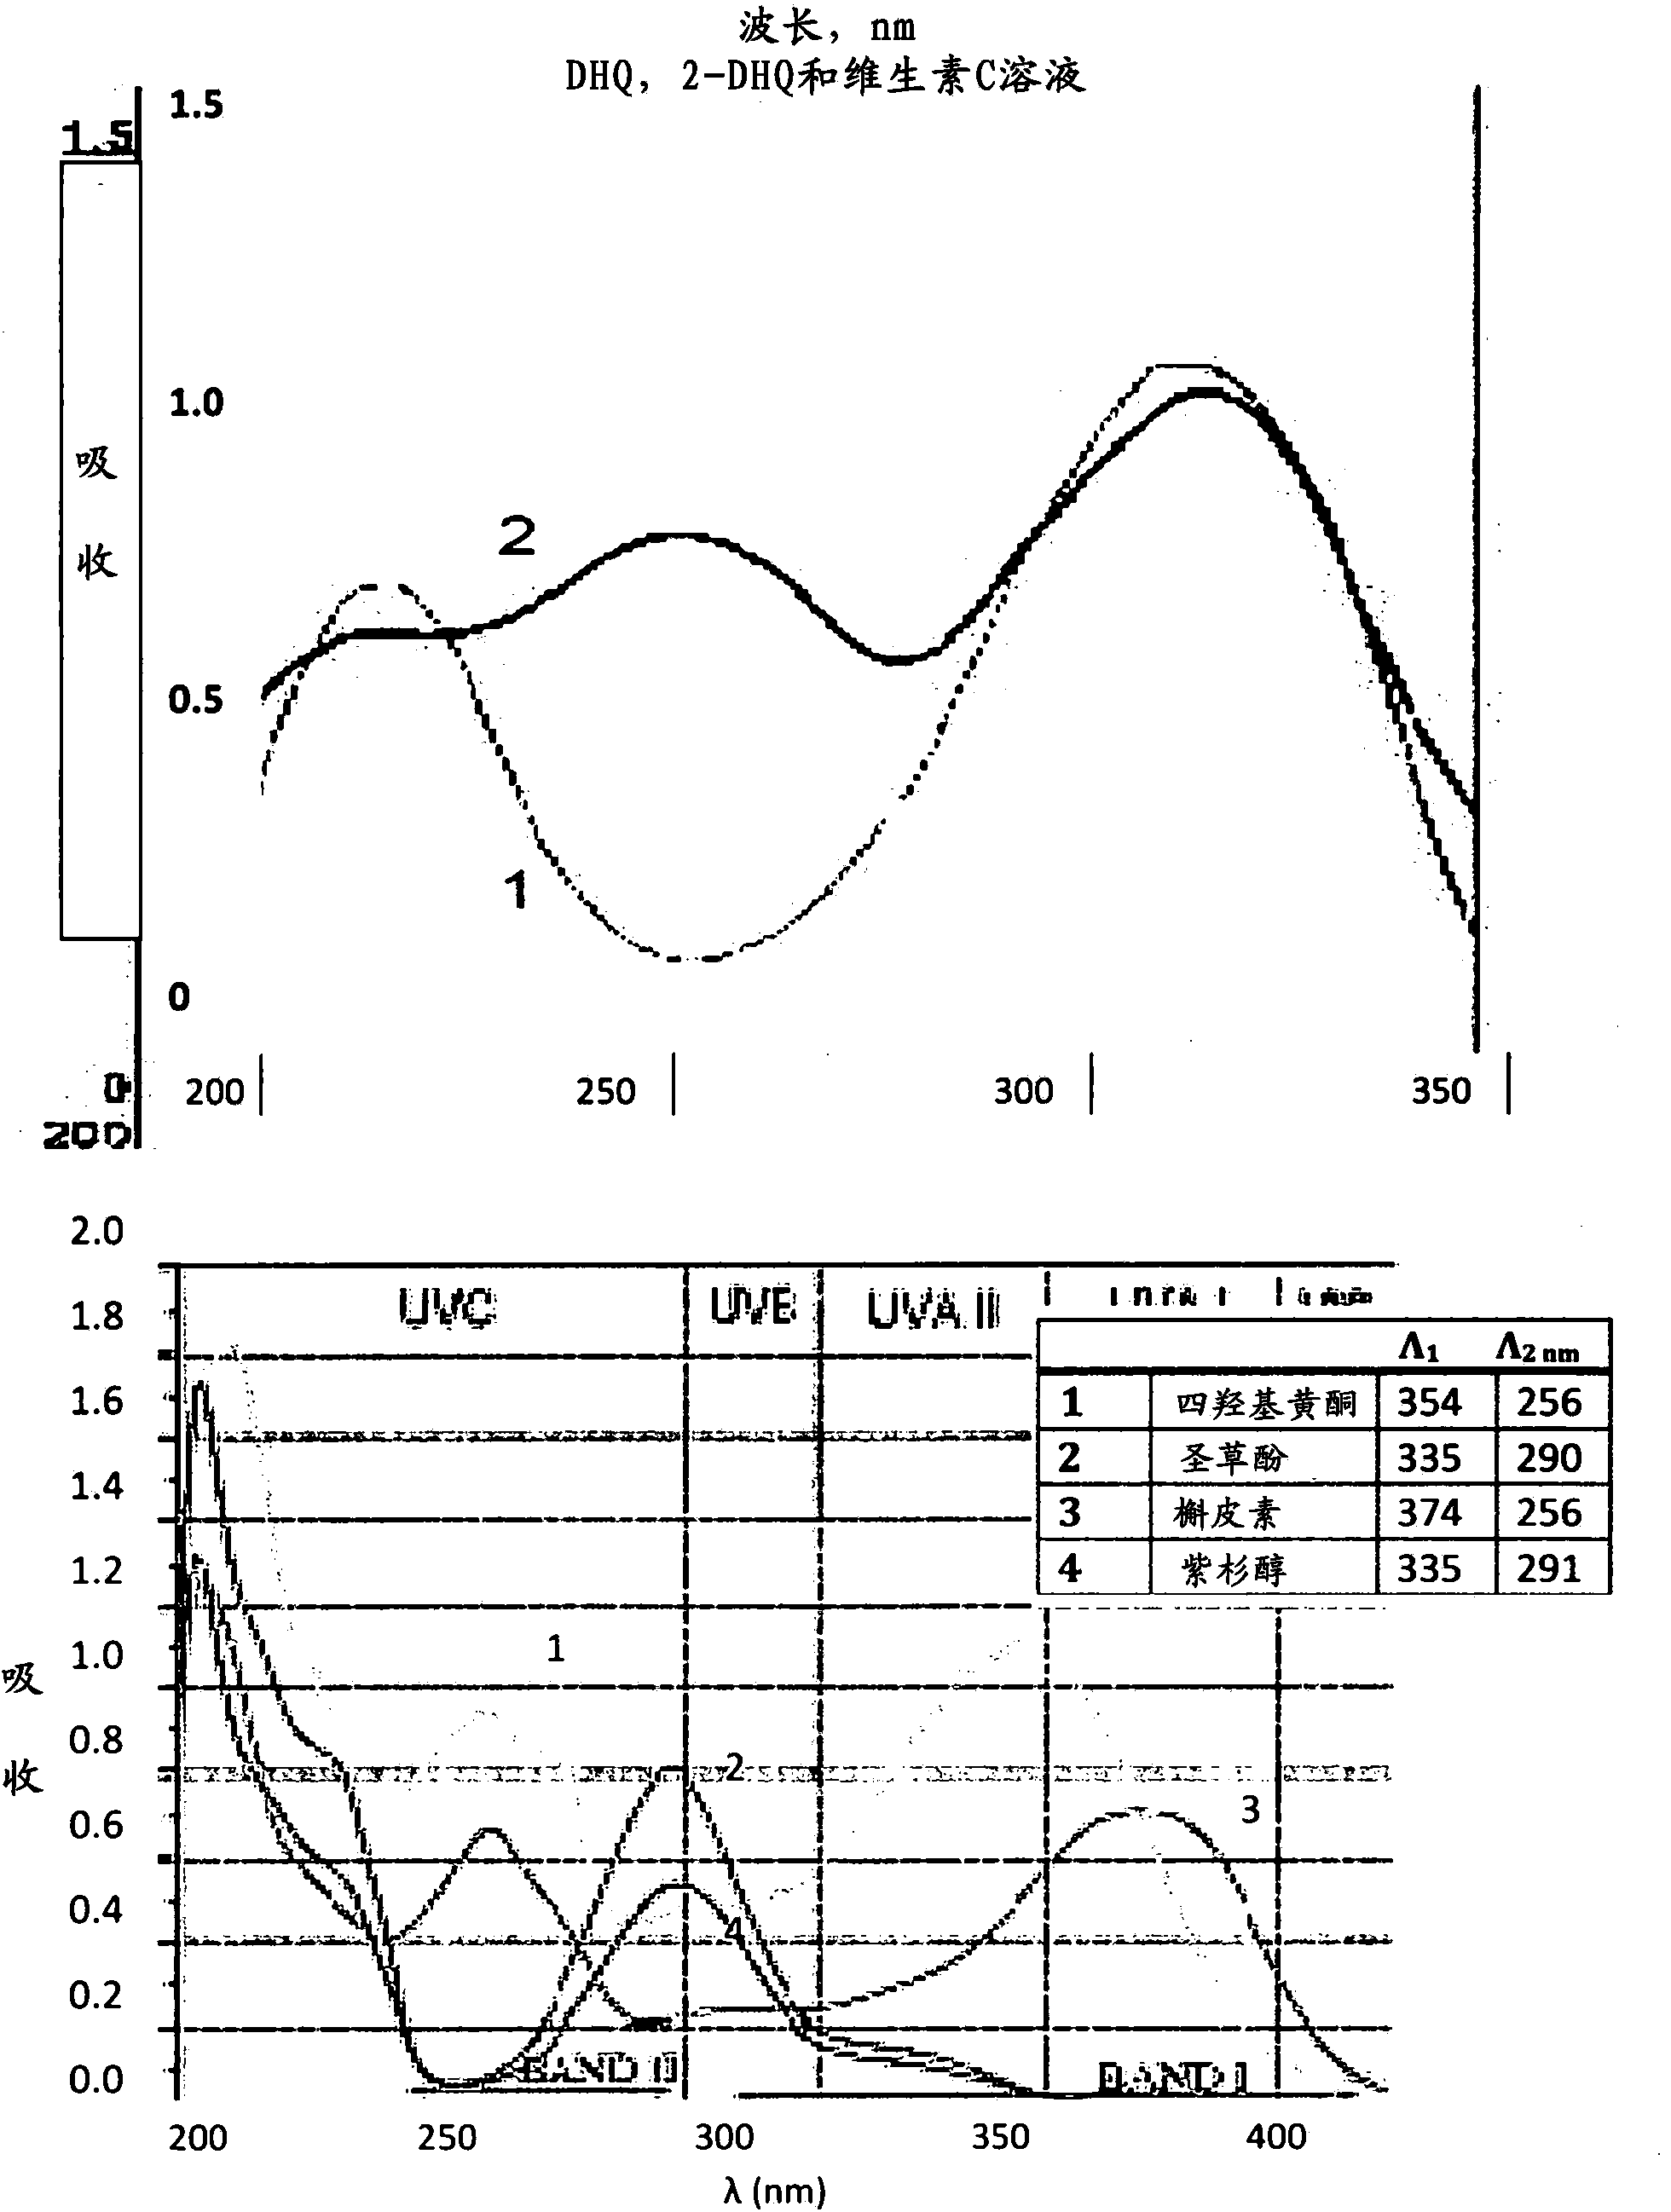 Method of using wood extracts in cosmetic and hygiene products